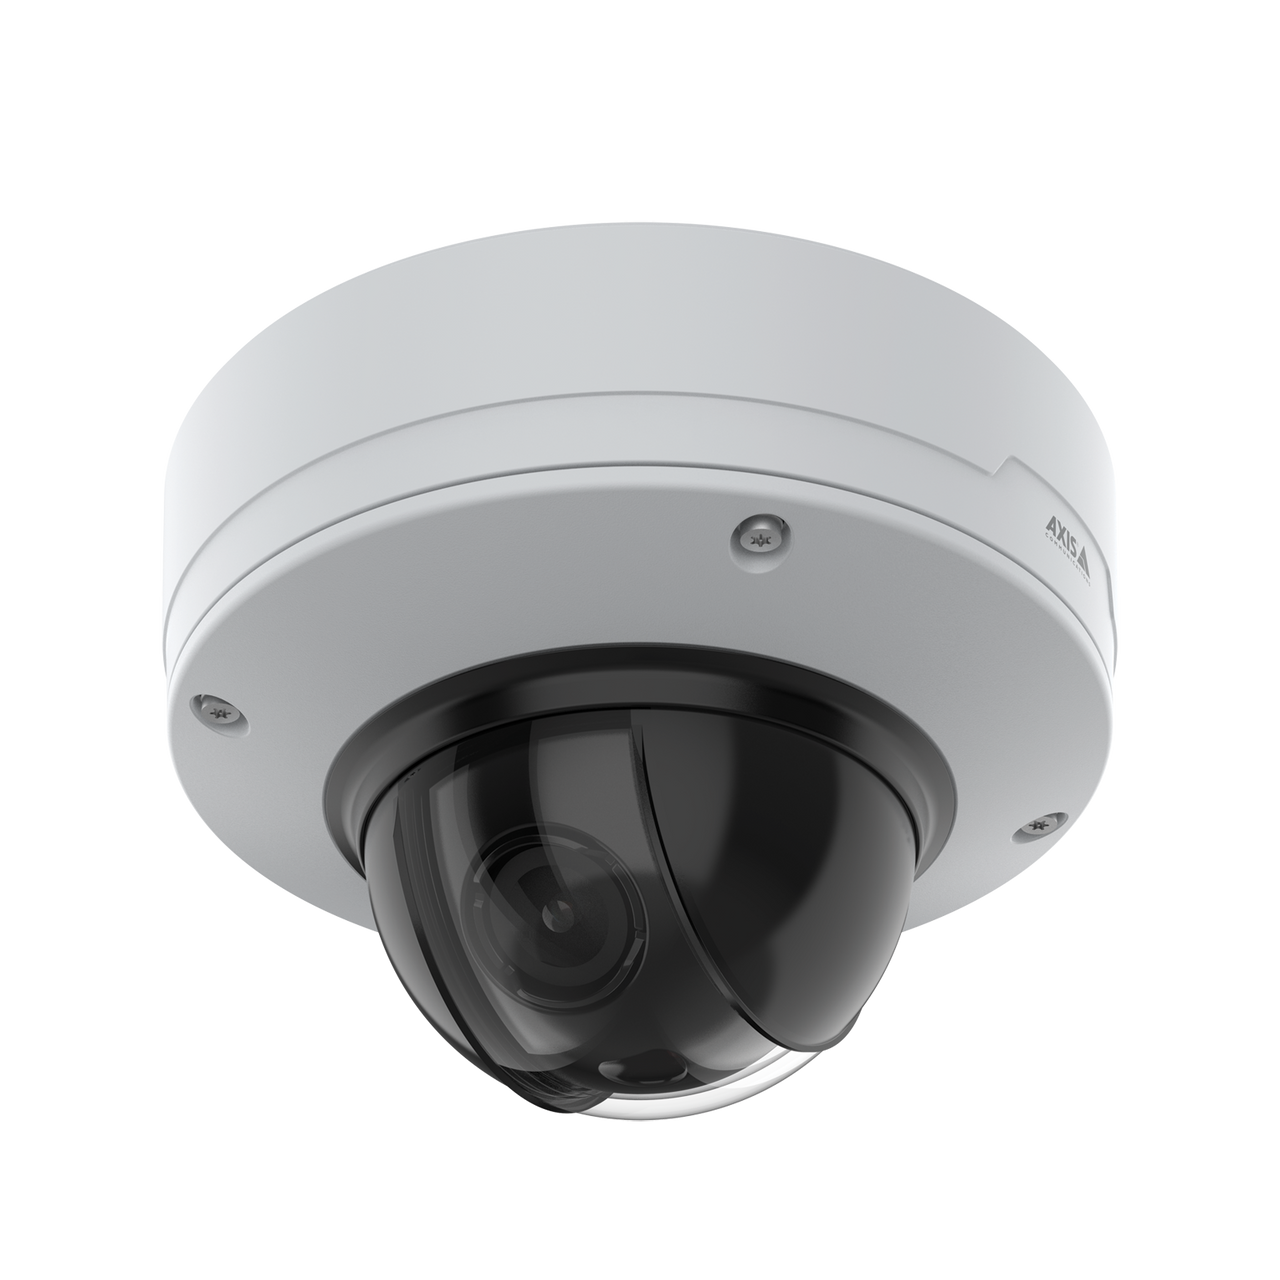 AXIS Q3538-LVE DOME CAMERA Advanced dome with deep learning and 4K